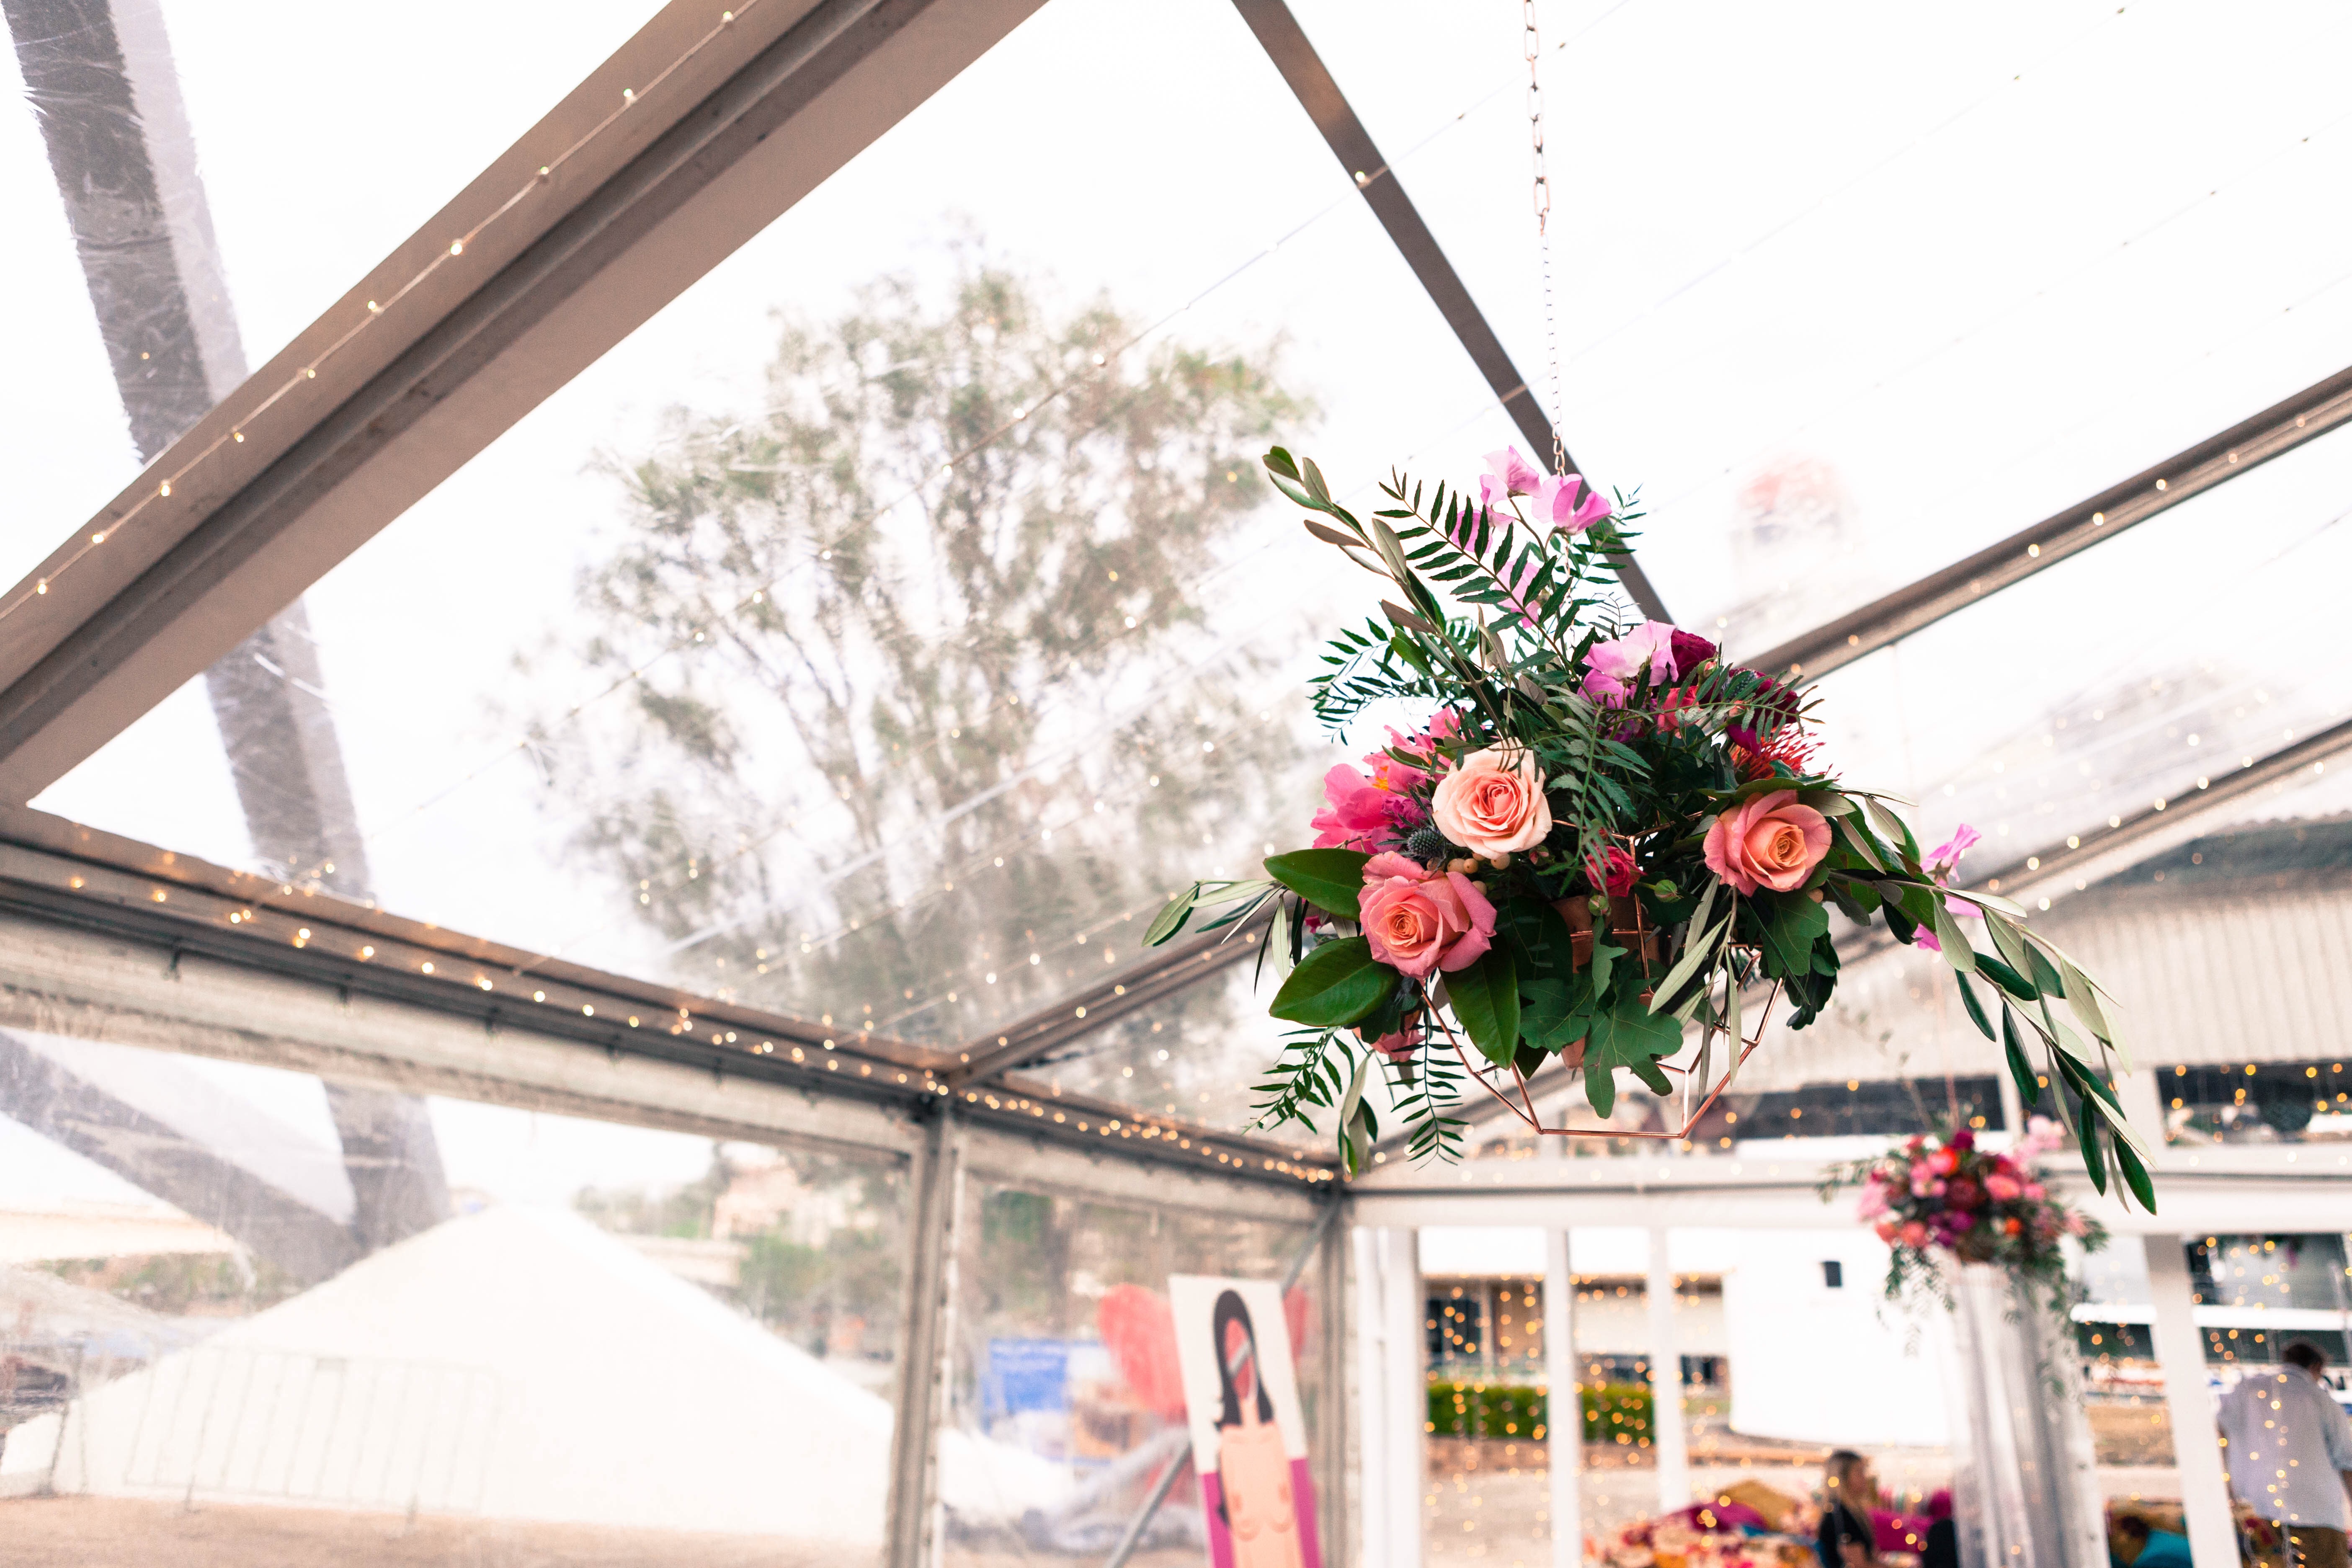 The floral arrangement hanging in the marquee